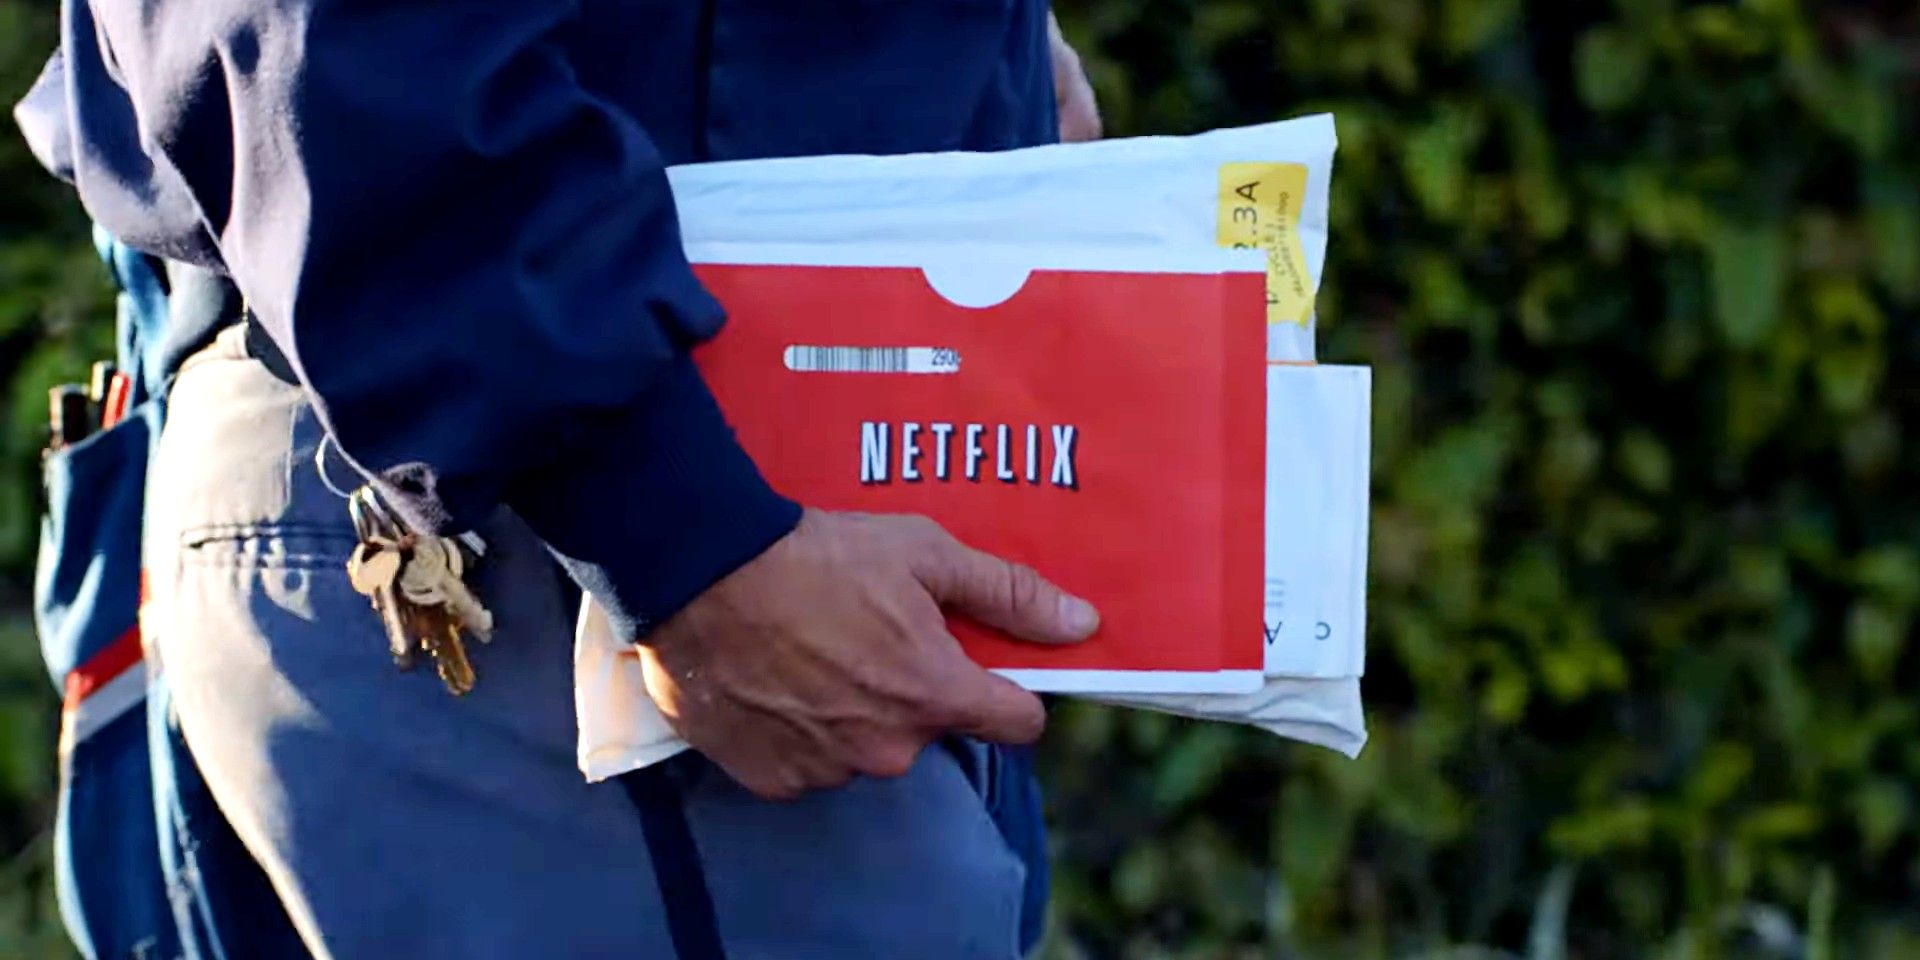 A mailman holding red envelope with the Netflix logo